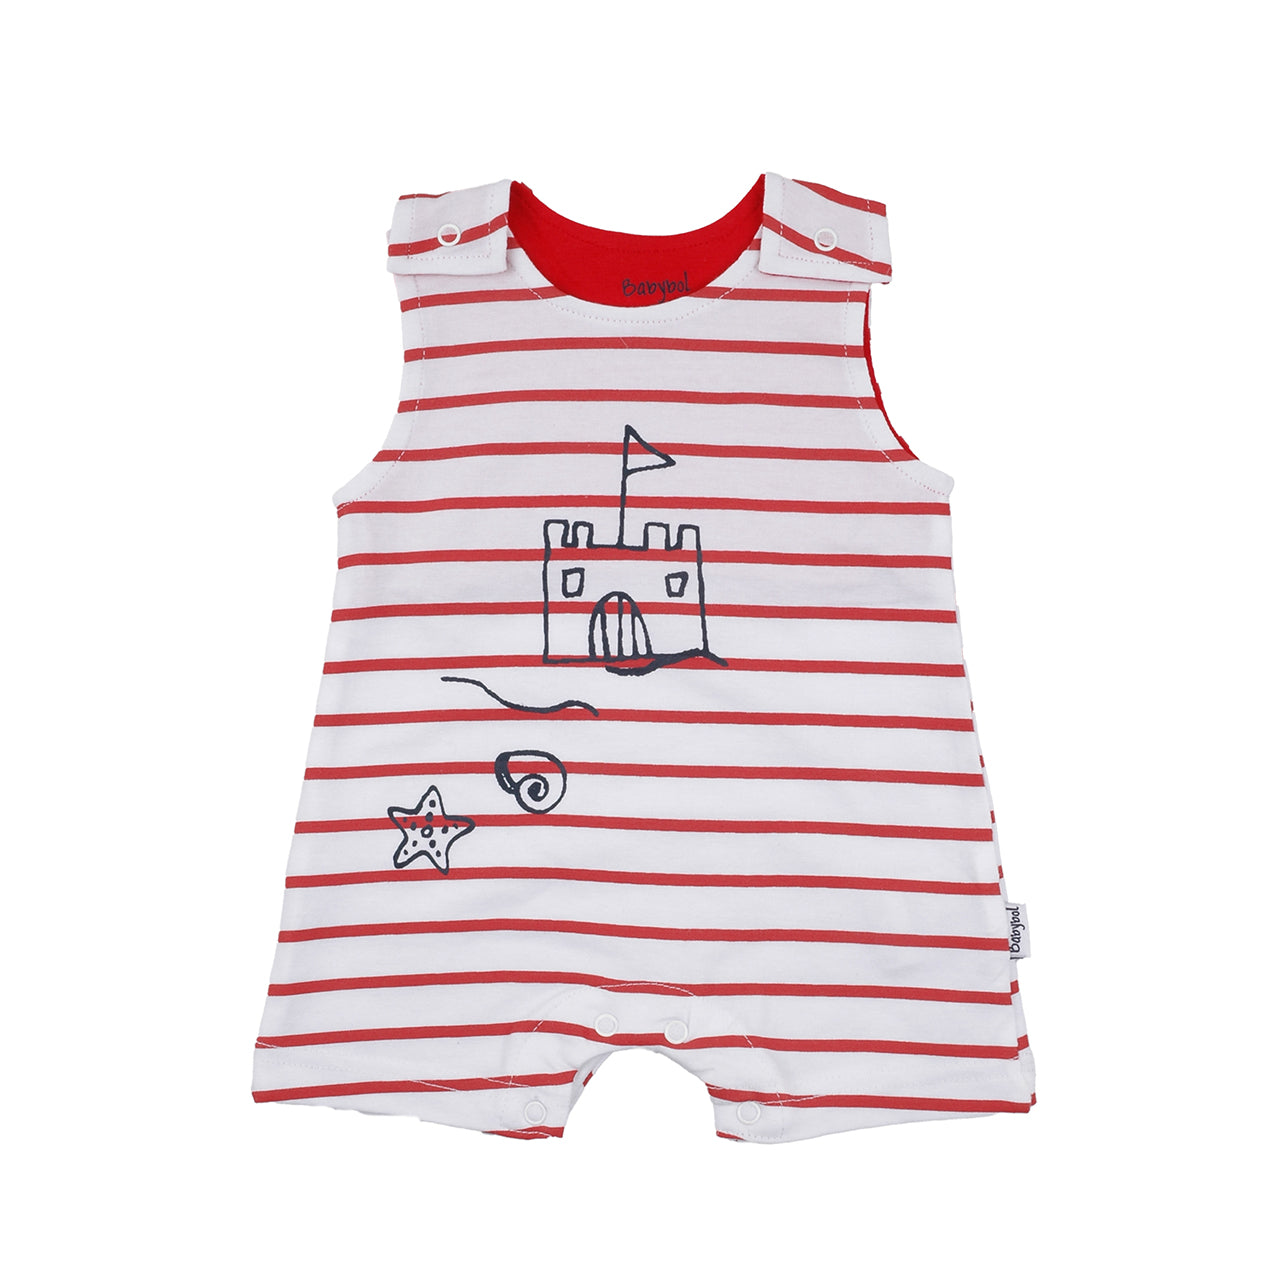 Baby boys red and white striped romper designed in Spain - Adora Childrenswear 